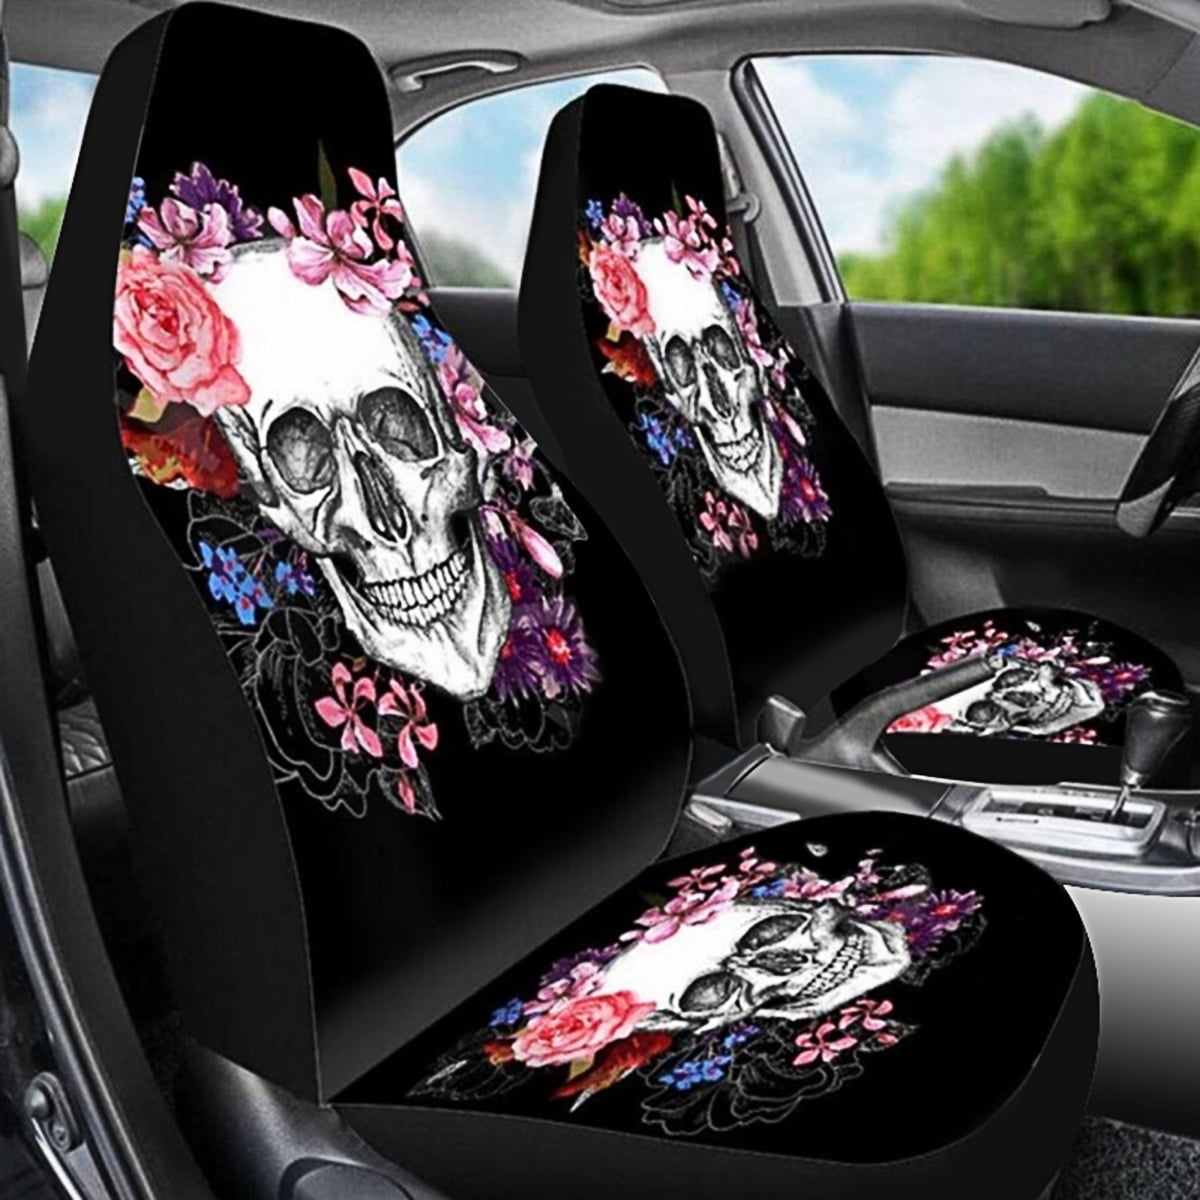 Car Seat Protector Covers Gra-Te-Ful Dead Skull Front Car Seats Cover Cushion Only Universal Fit for Cars Truck SUV Van 